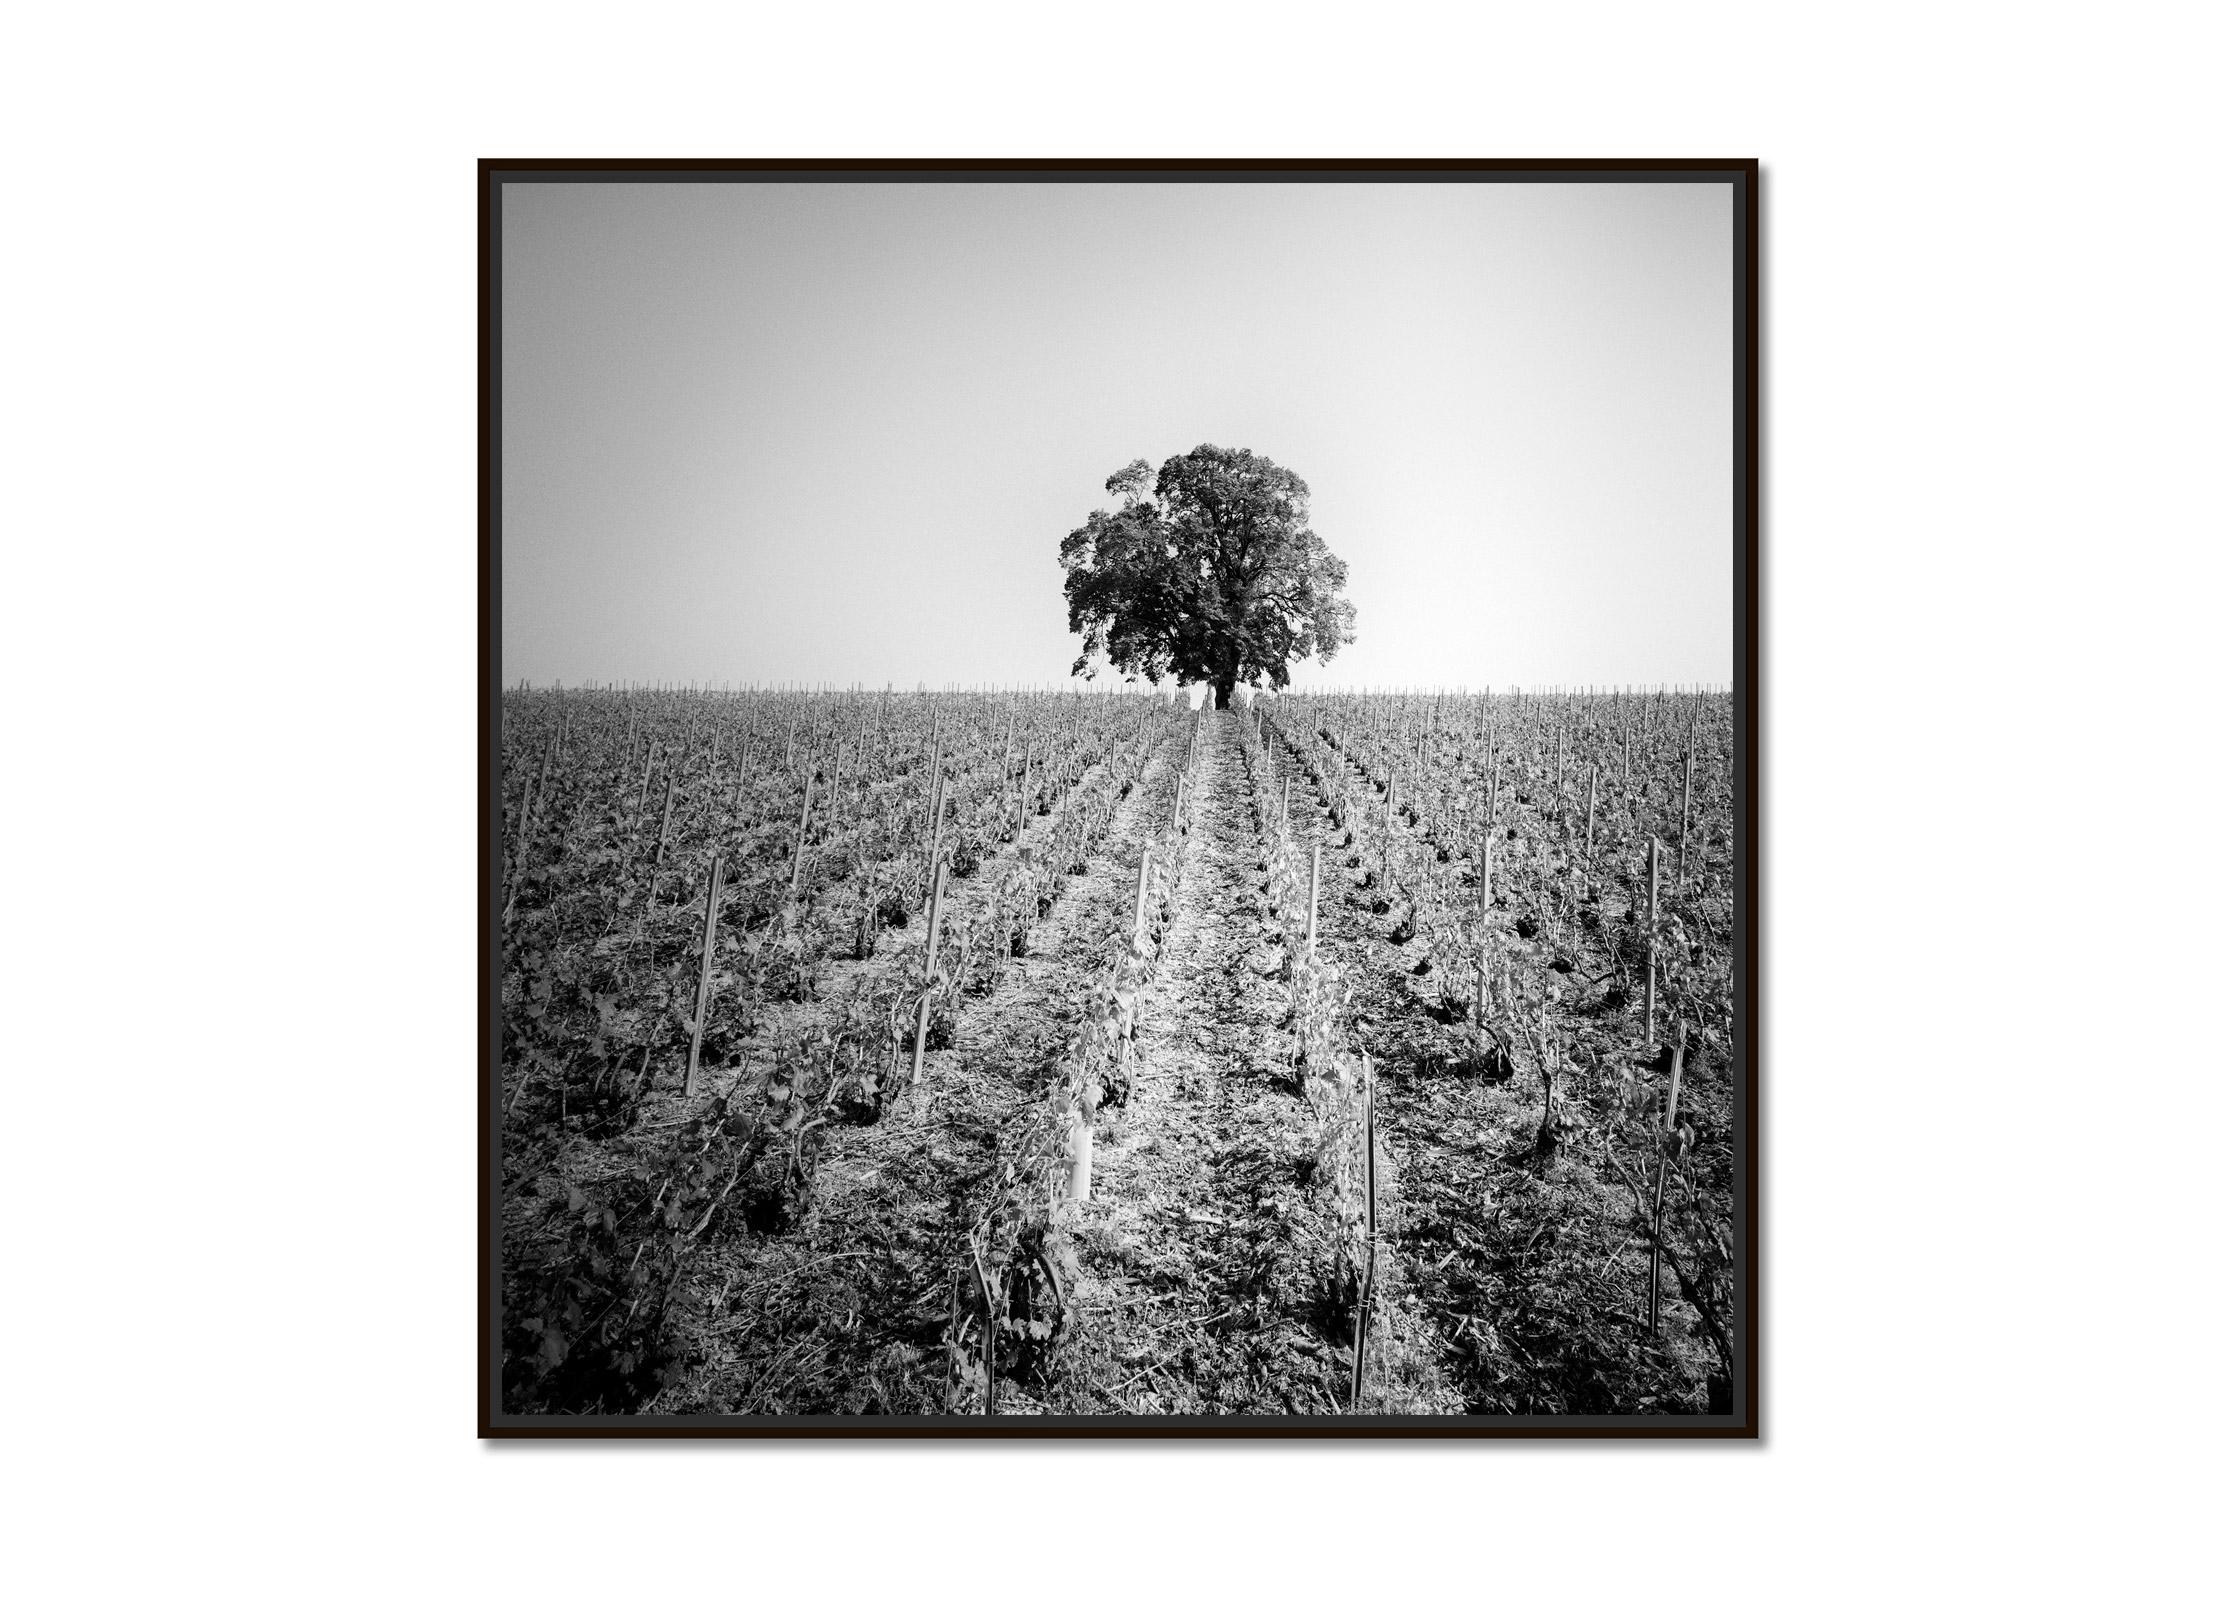 Vineyard Romance, single Tree, France, black and white photography, landscape - Photograph by Gerald Berghammer